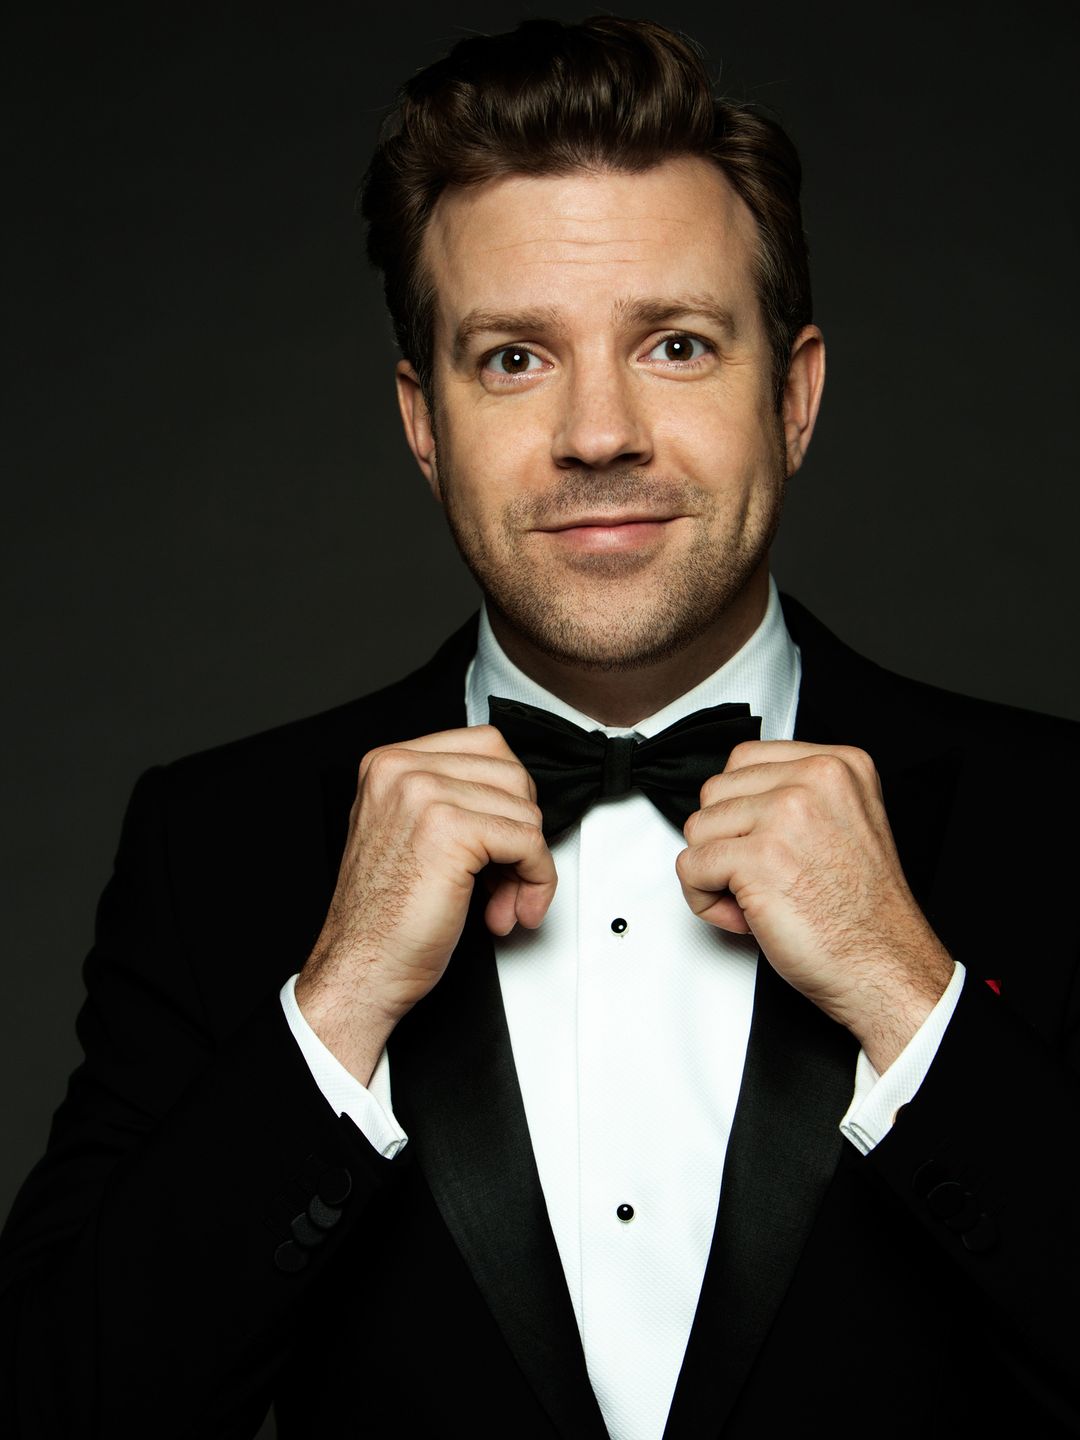 Jason Sudeikis does he have a wife